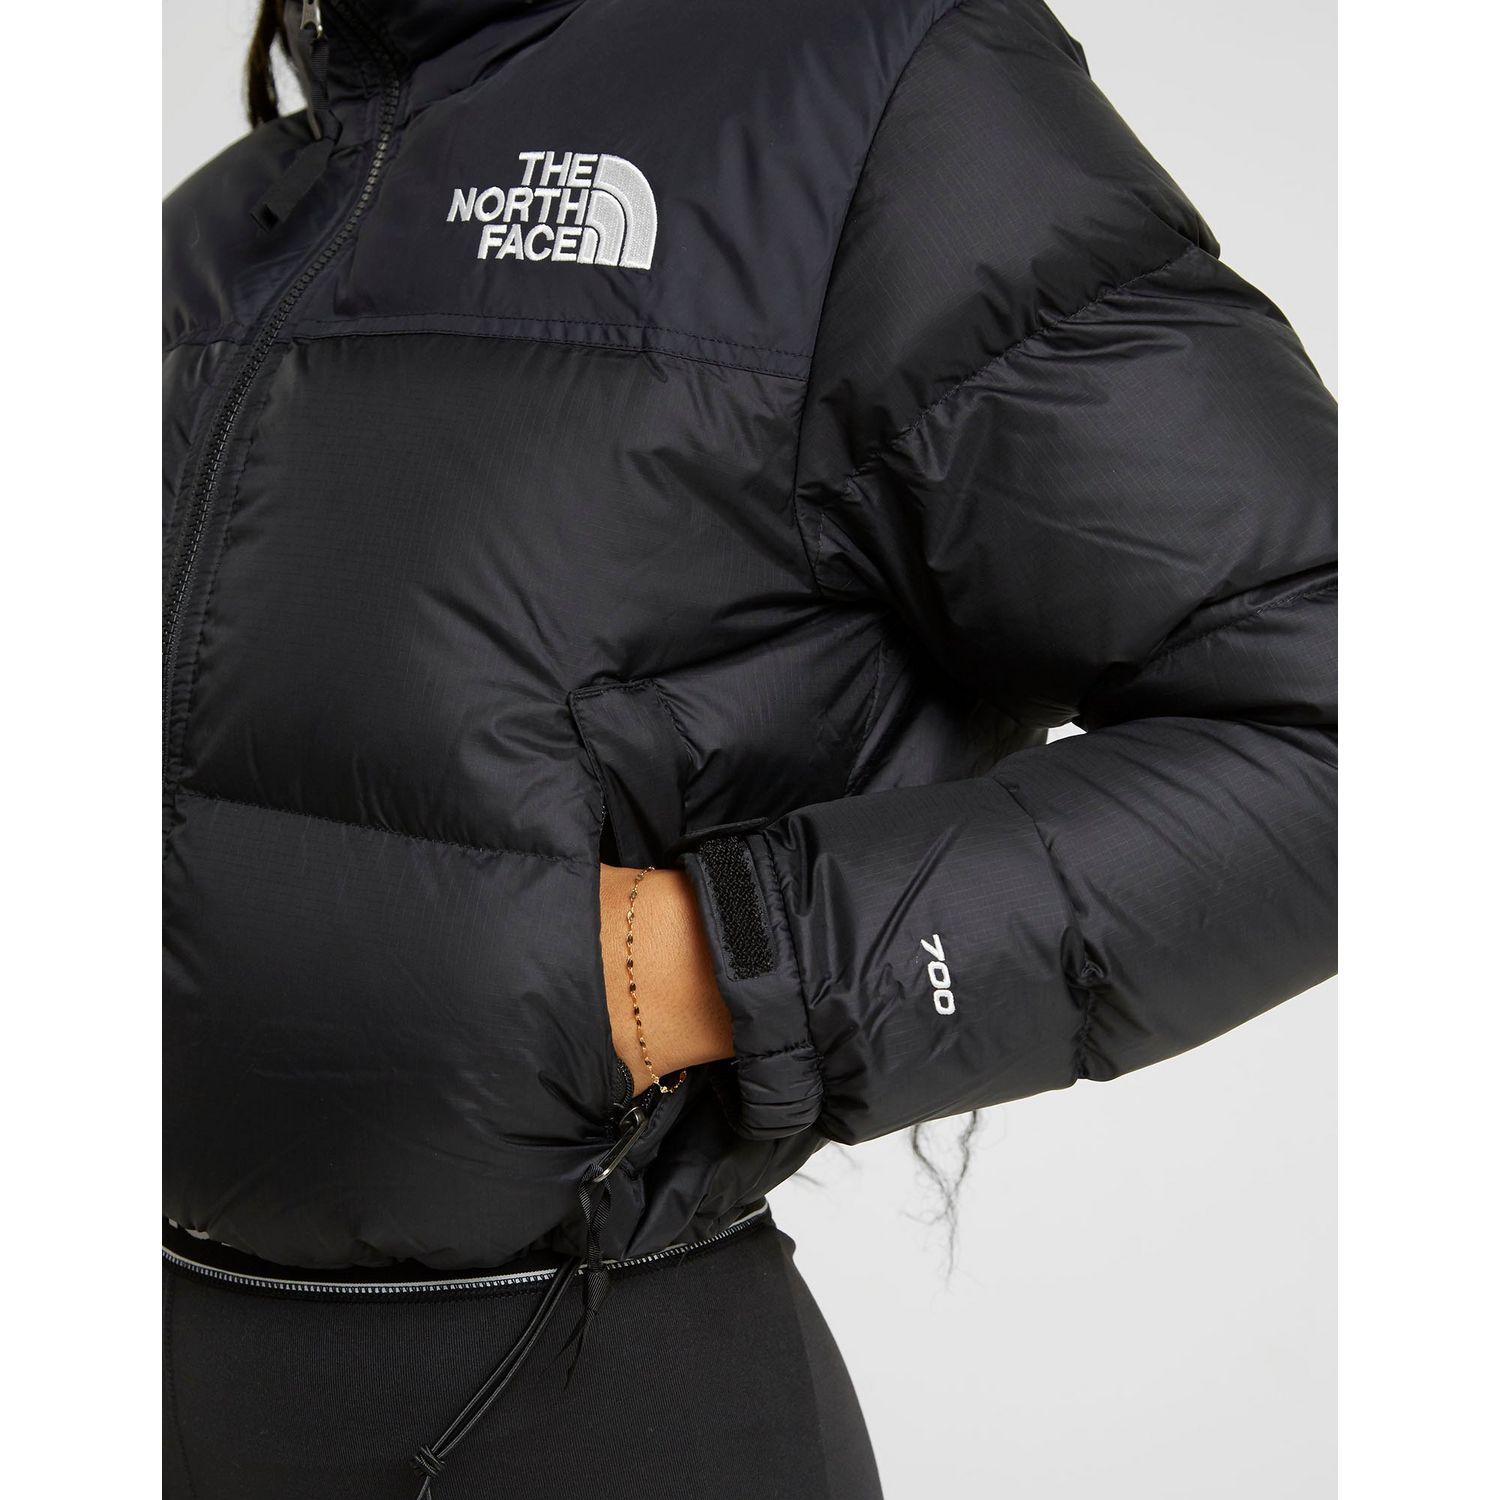 North Face Longline Puffer Jacket Online Shopping For Women Men Kids Fashion Lifestyle Free Delivery Returns